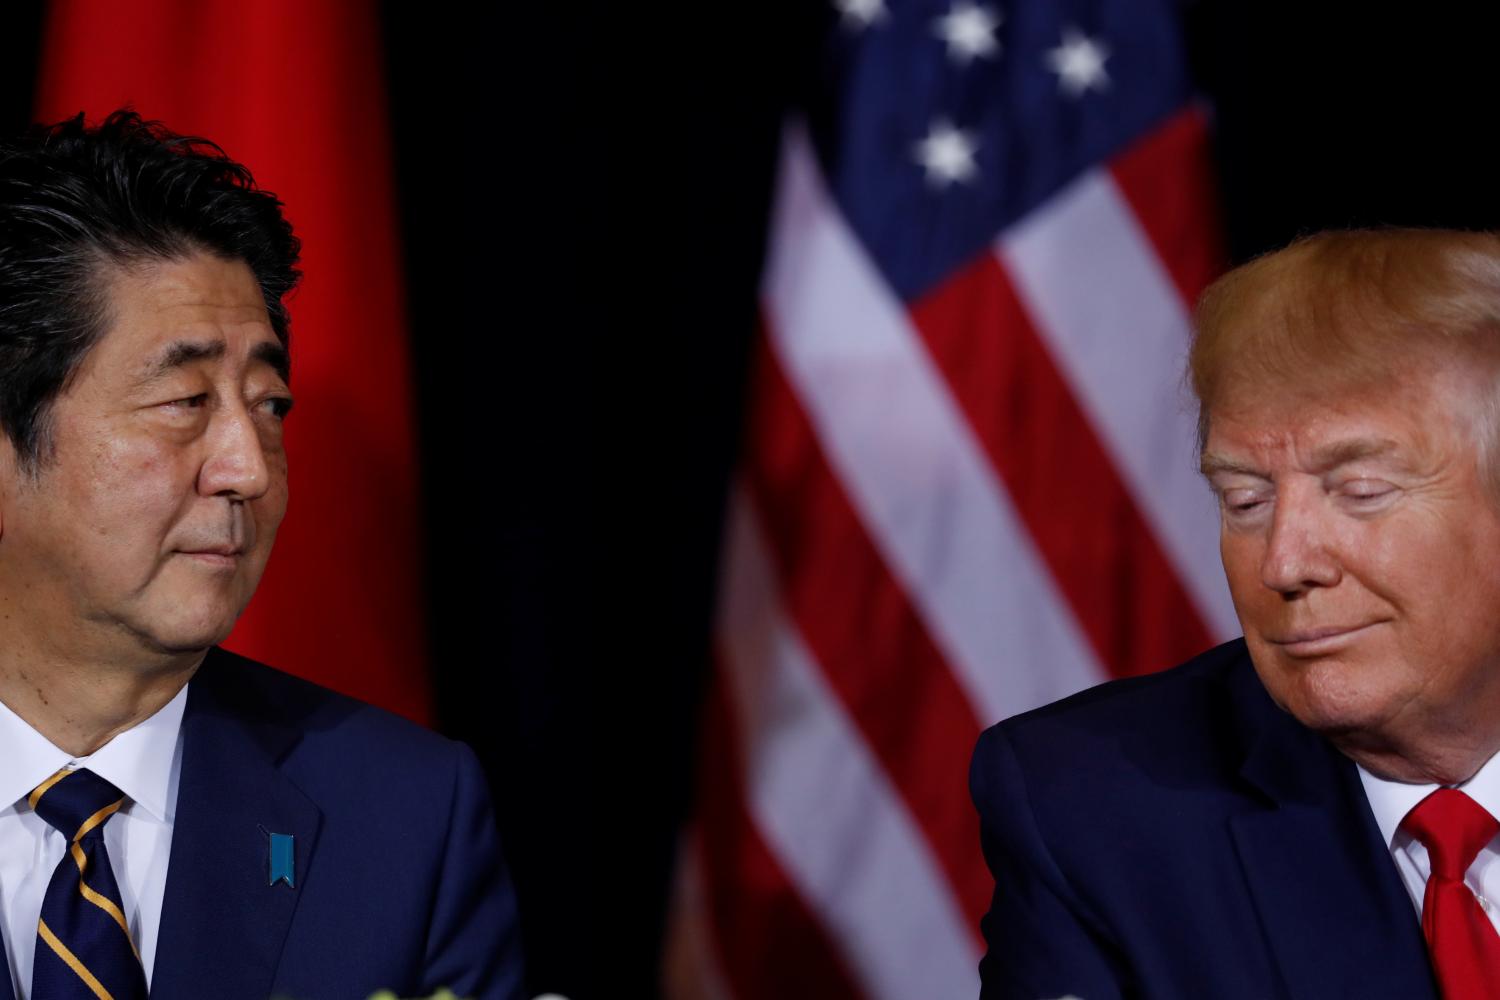 Japan's Prime Minister Shinzo Abe meets with U.S. President Donald Trump on the sidelines of the 74th session of the United Nations General Assembly (UNGA) in New York City, New York, U.S., September 25, 2019.  REUTERS/Jonathan Ernst - RC136BC73A00